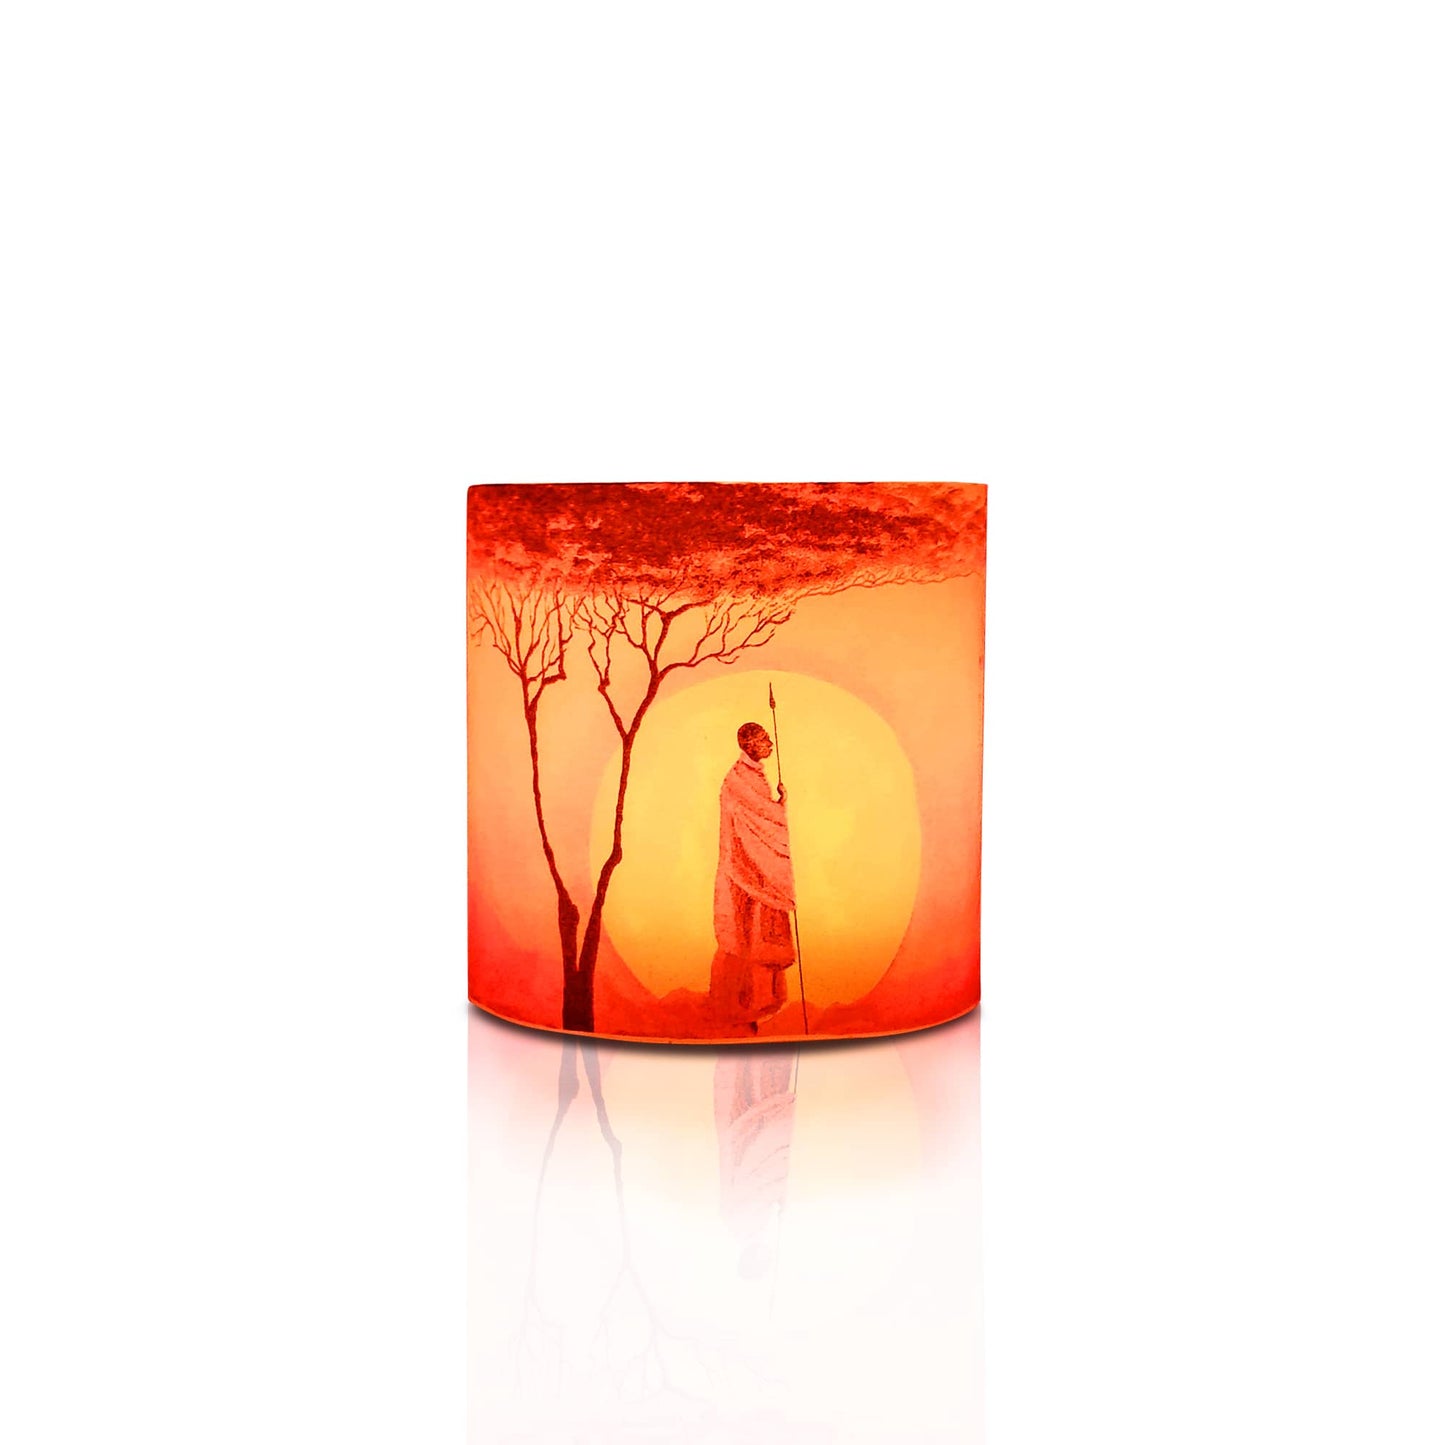 AuraDecor 4*4 Inch White Hollow Cylinderical Candle ( Monk Design Night Glow )